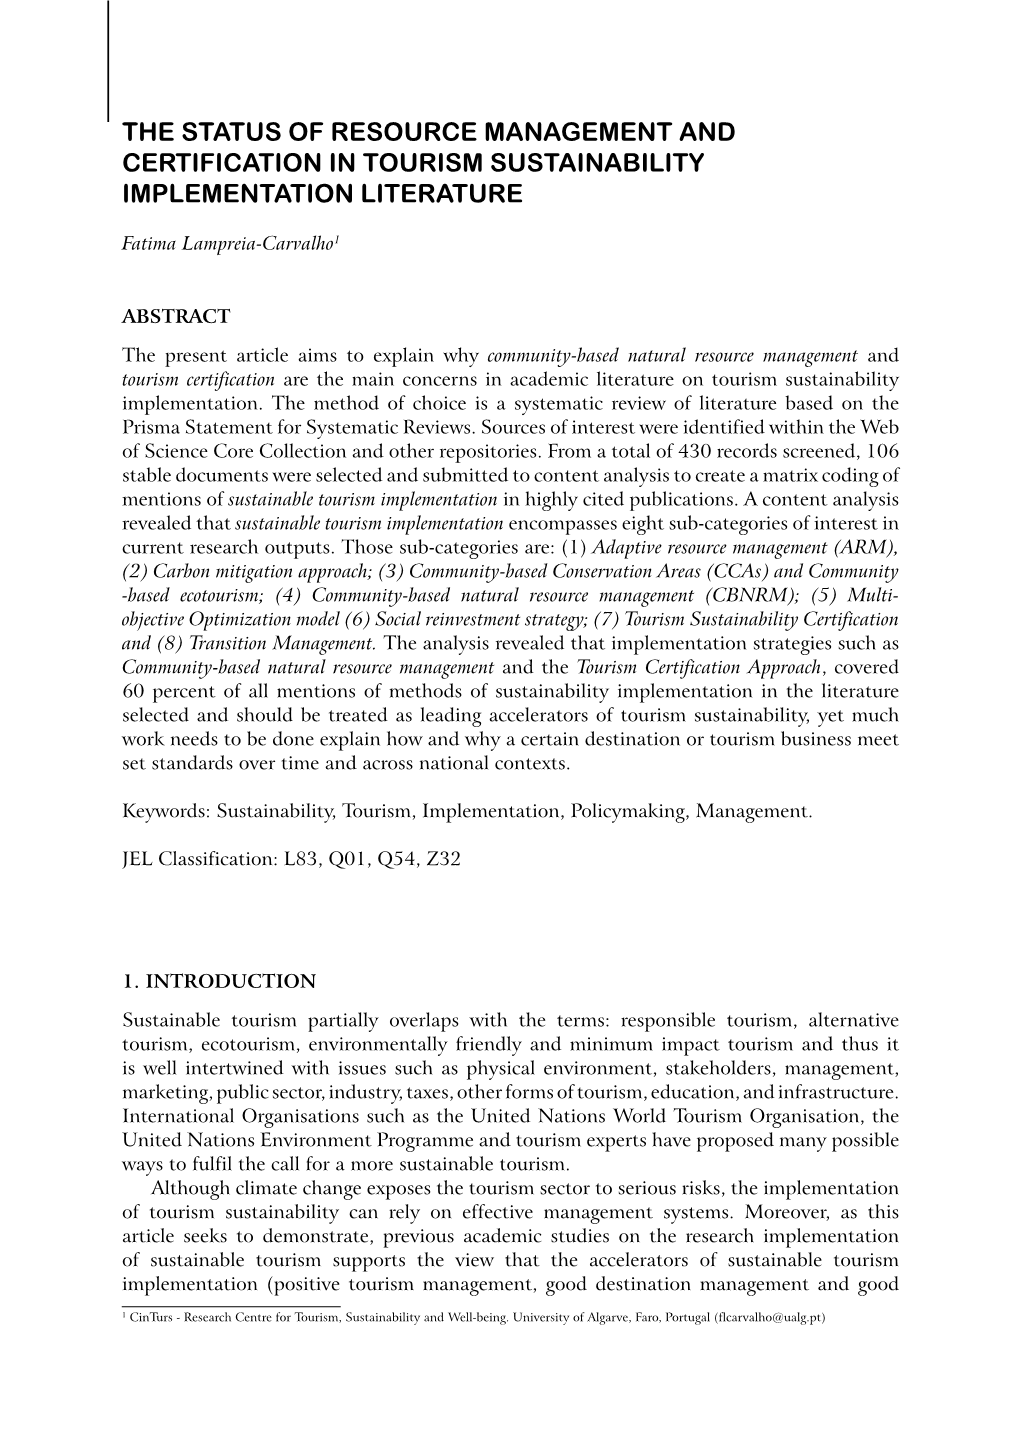 The Status of Resource Management and Certification in Tourism Sustainability Implementation Literature